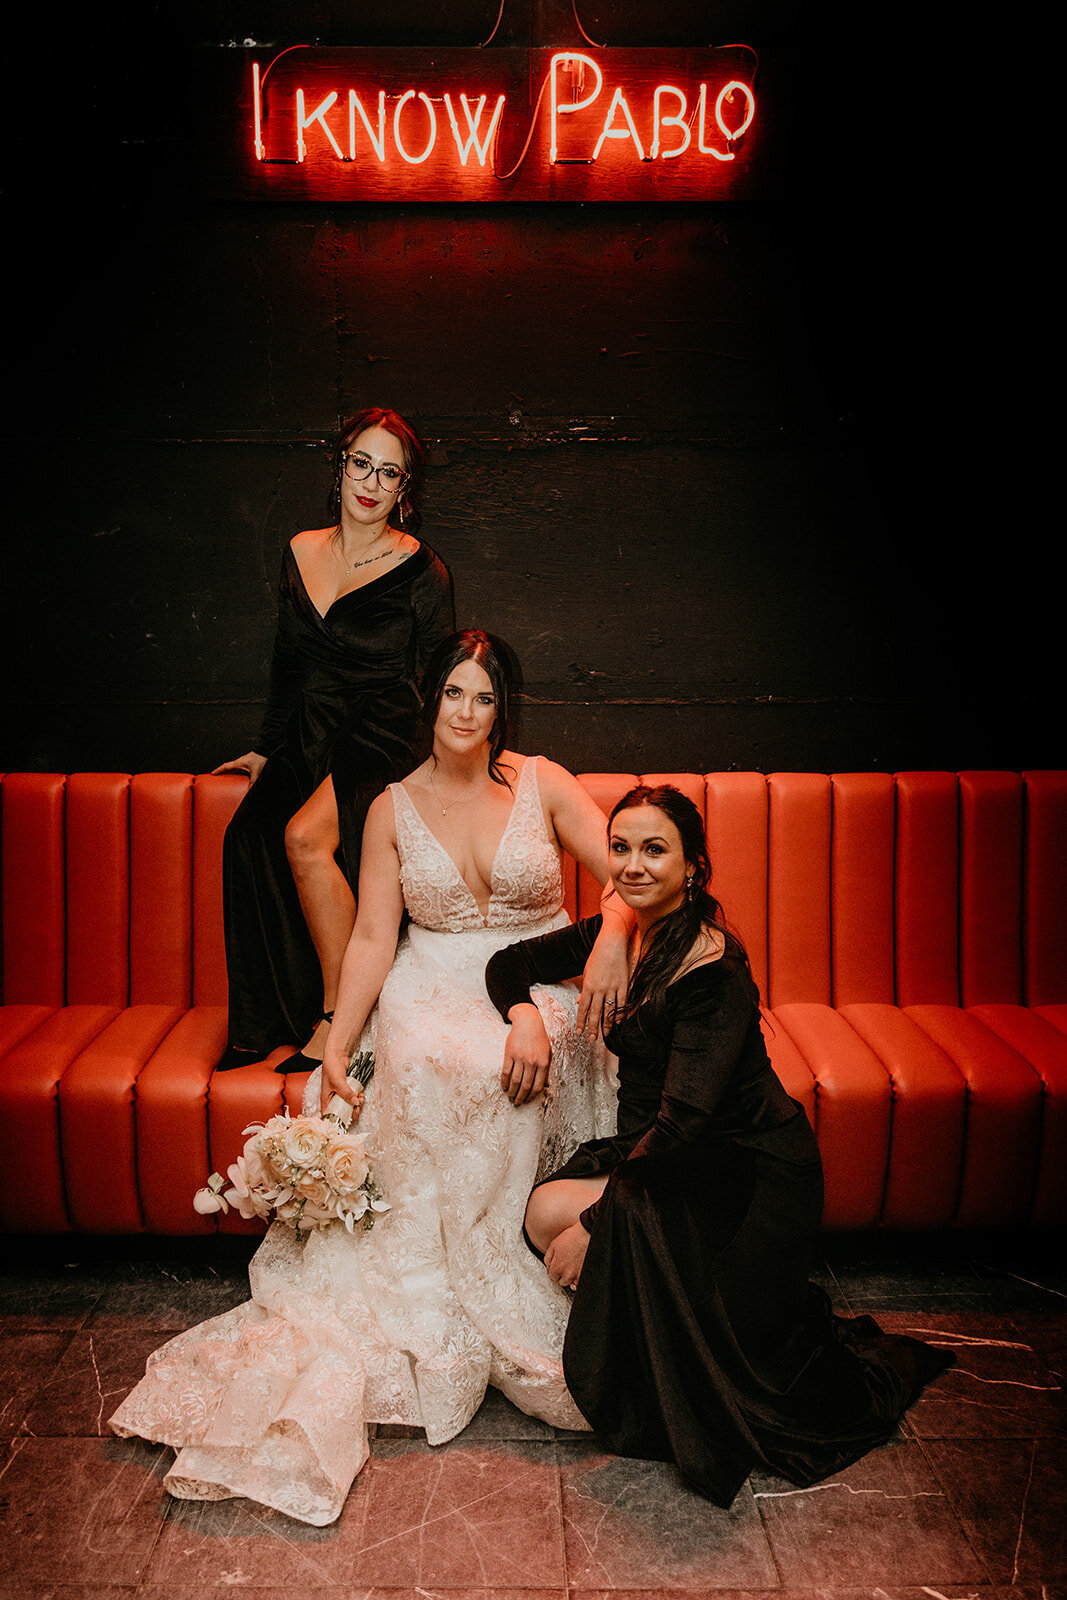 Bride in her white wedding dress with her two bridesmaids in black dresses.